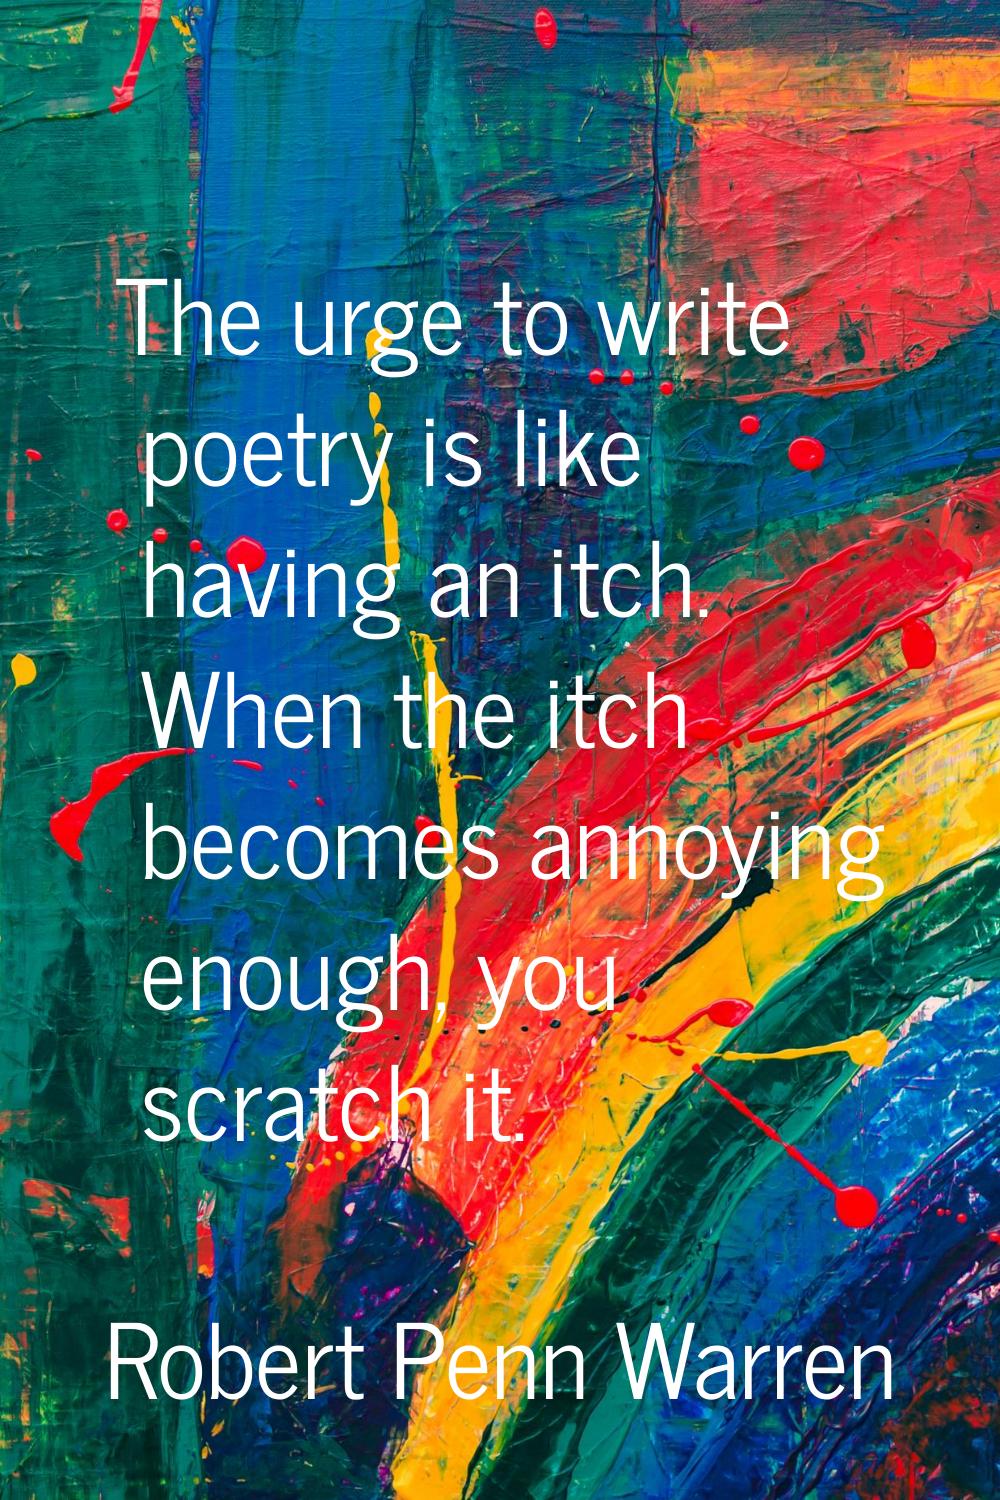 The urge to write poetry is like having an itch. When the itch becomes annoying enough, you scratch